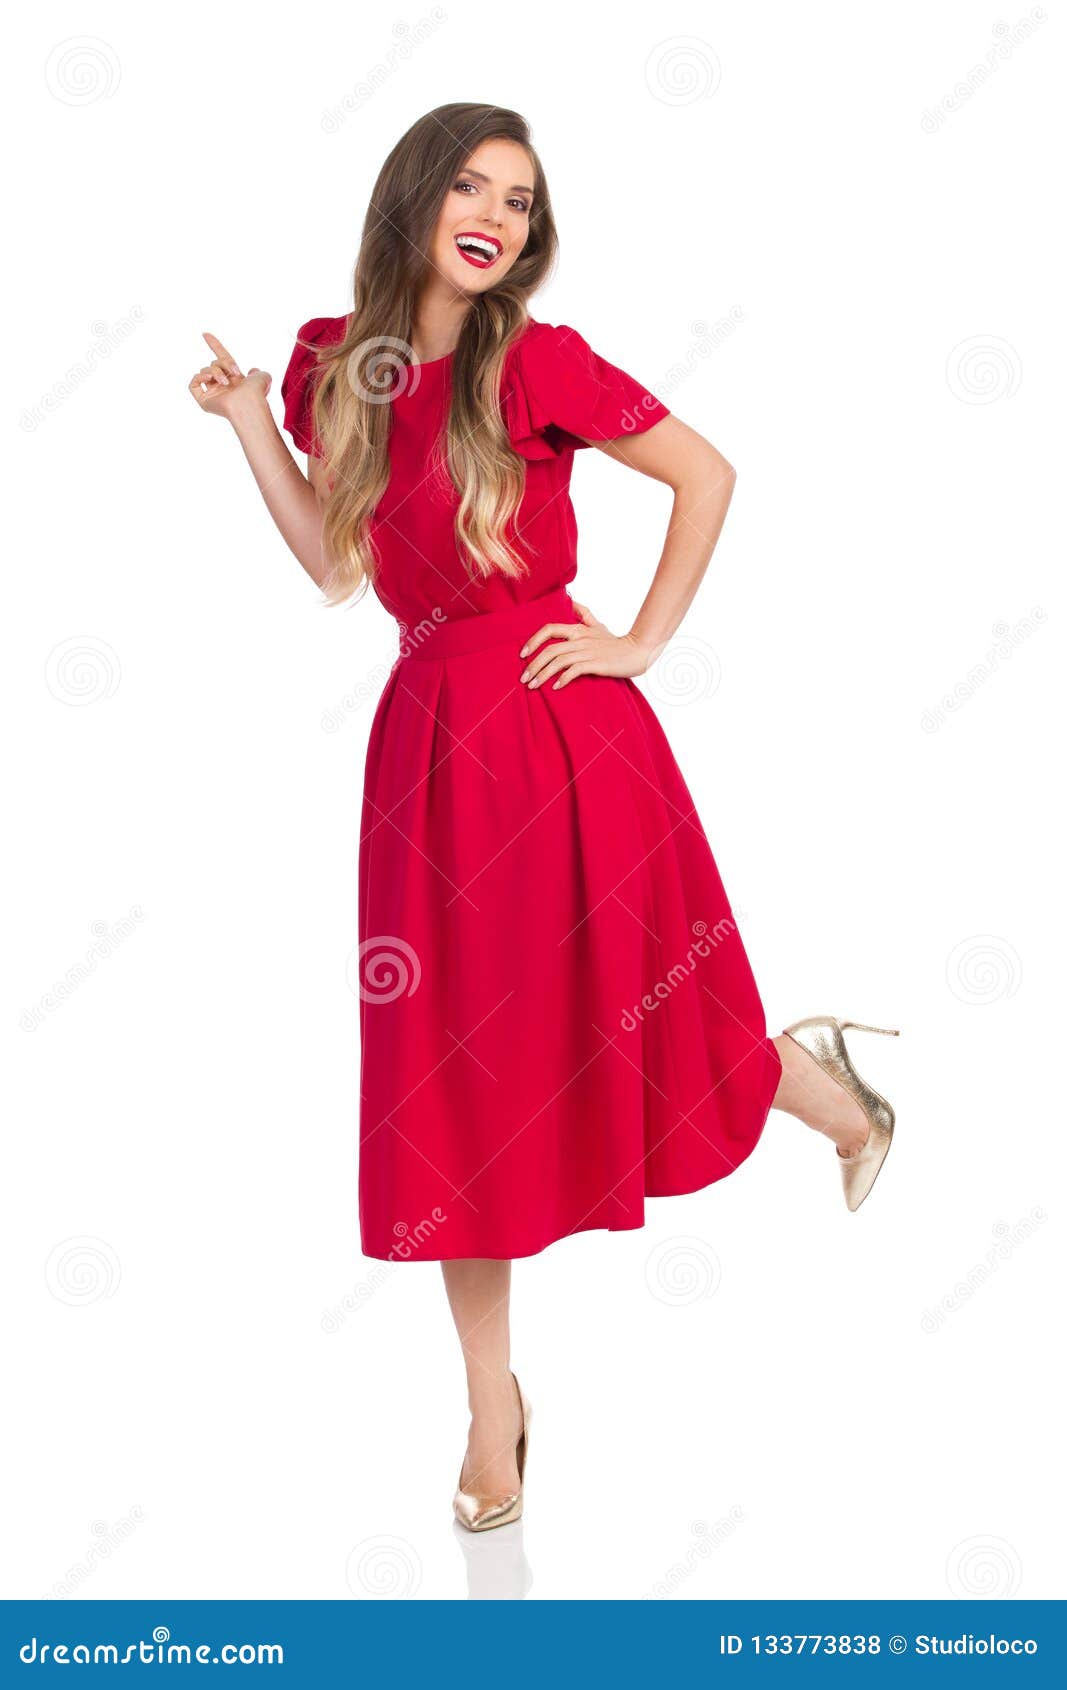 Laughing Beautiful Young Woman in Red Dress and High Heels is Standing ...